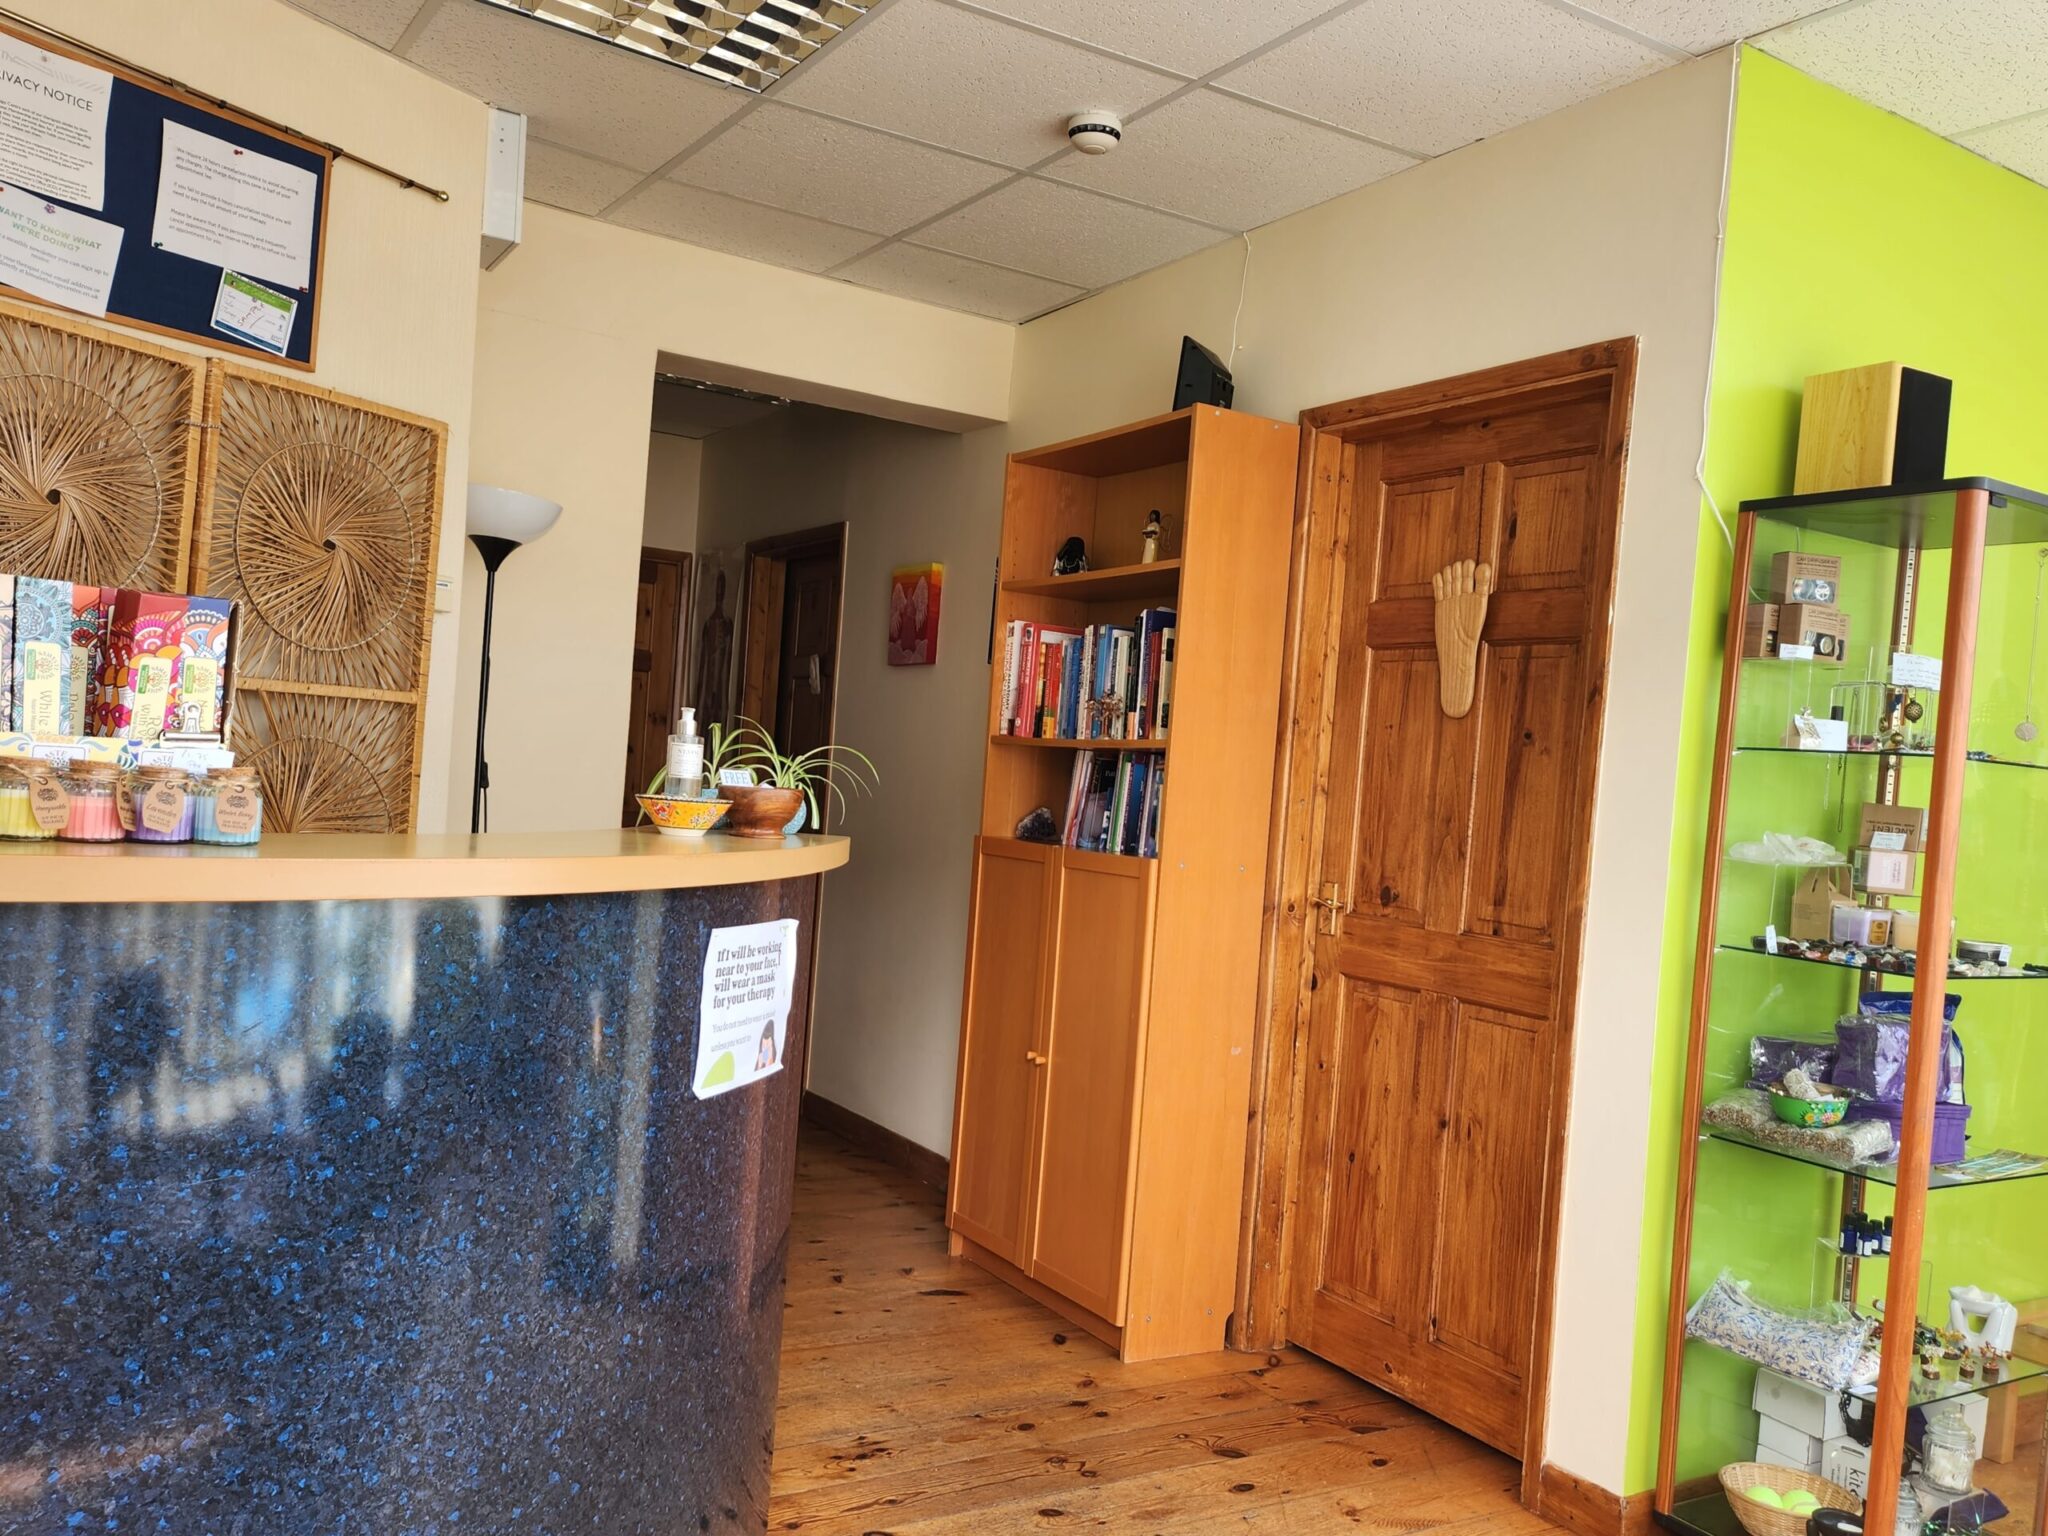 Reception area at Therapy Centre